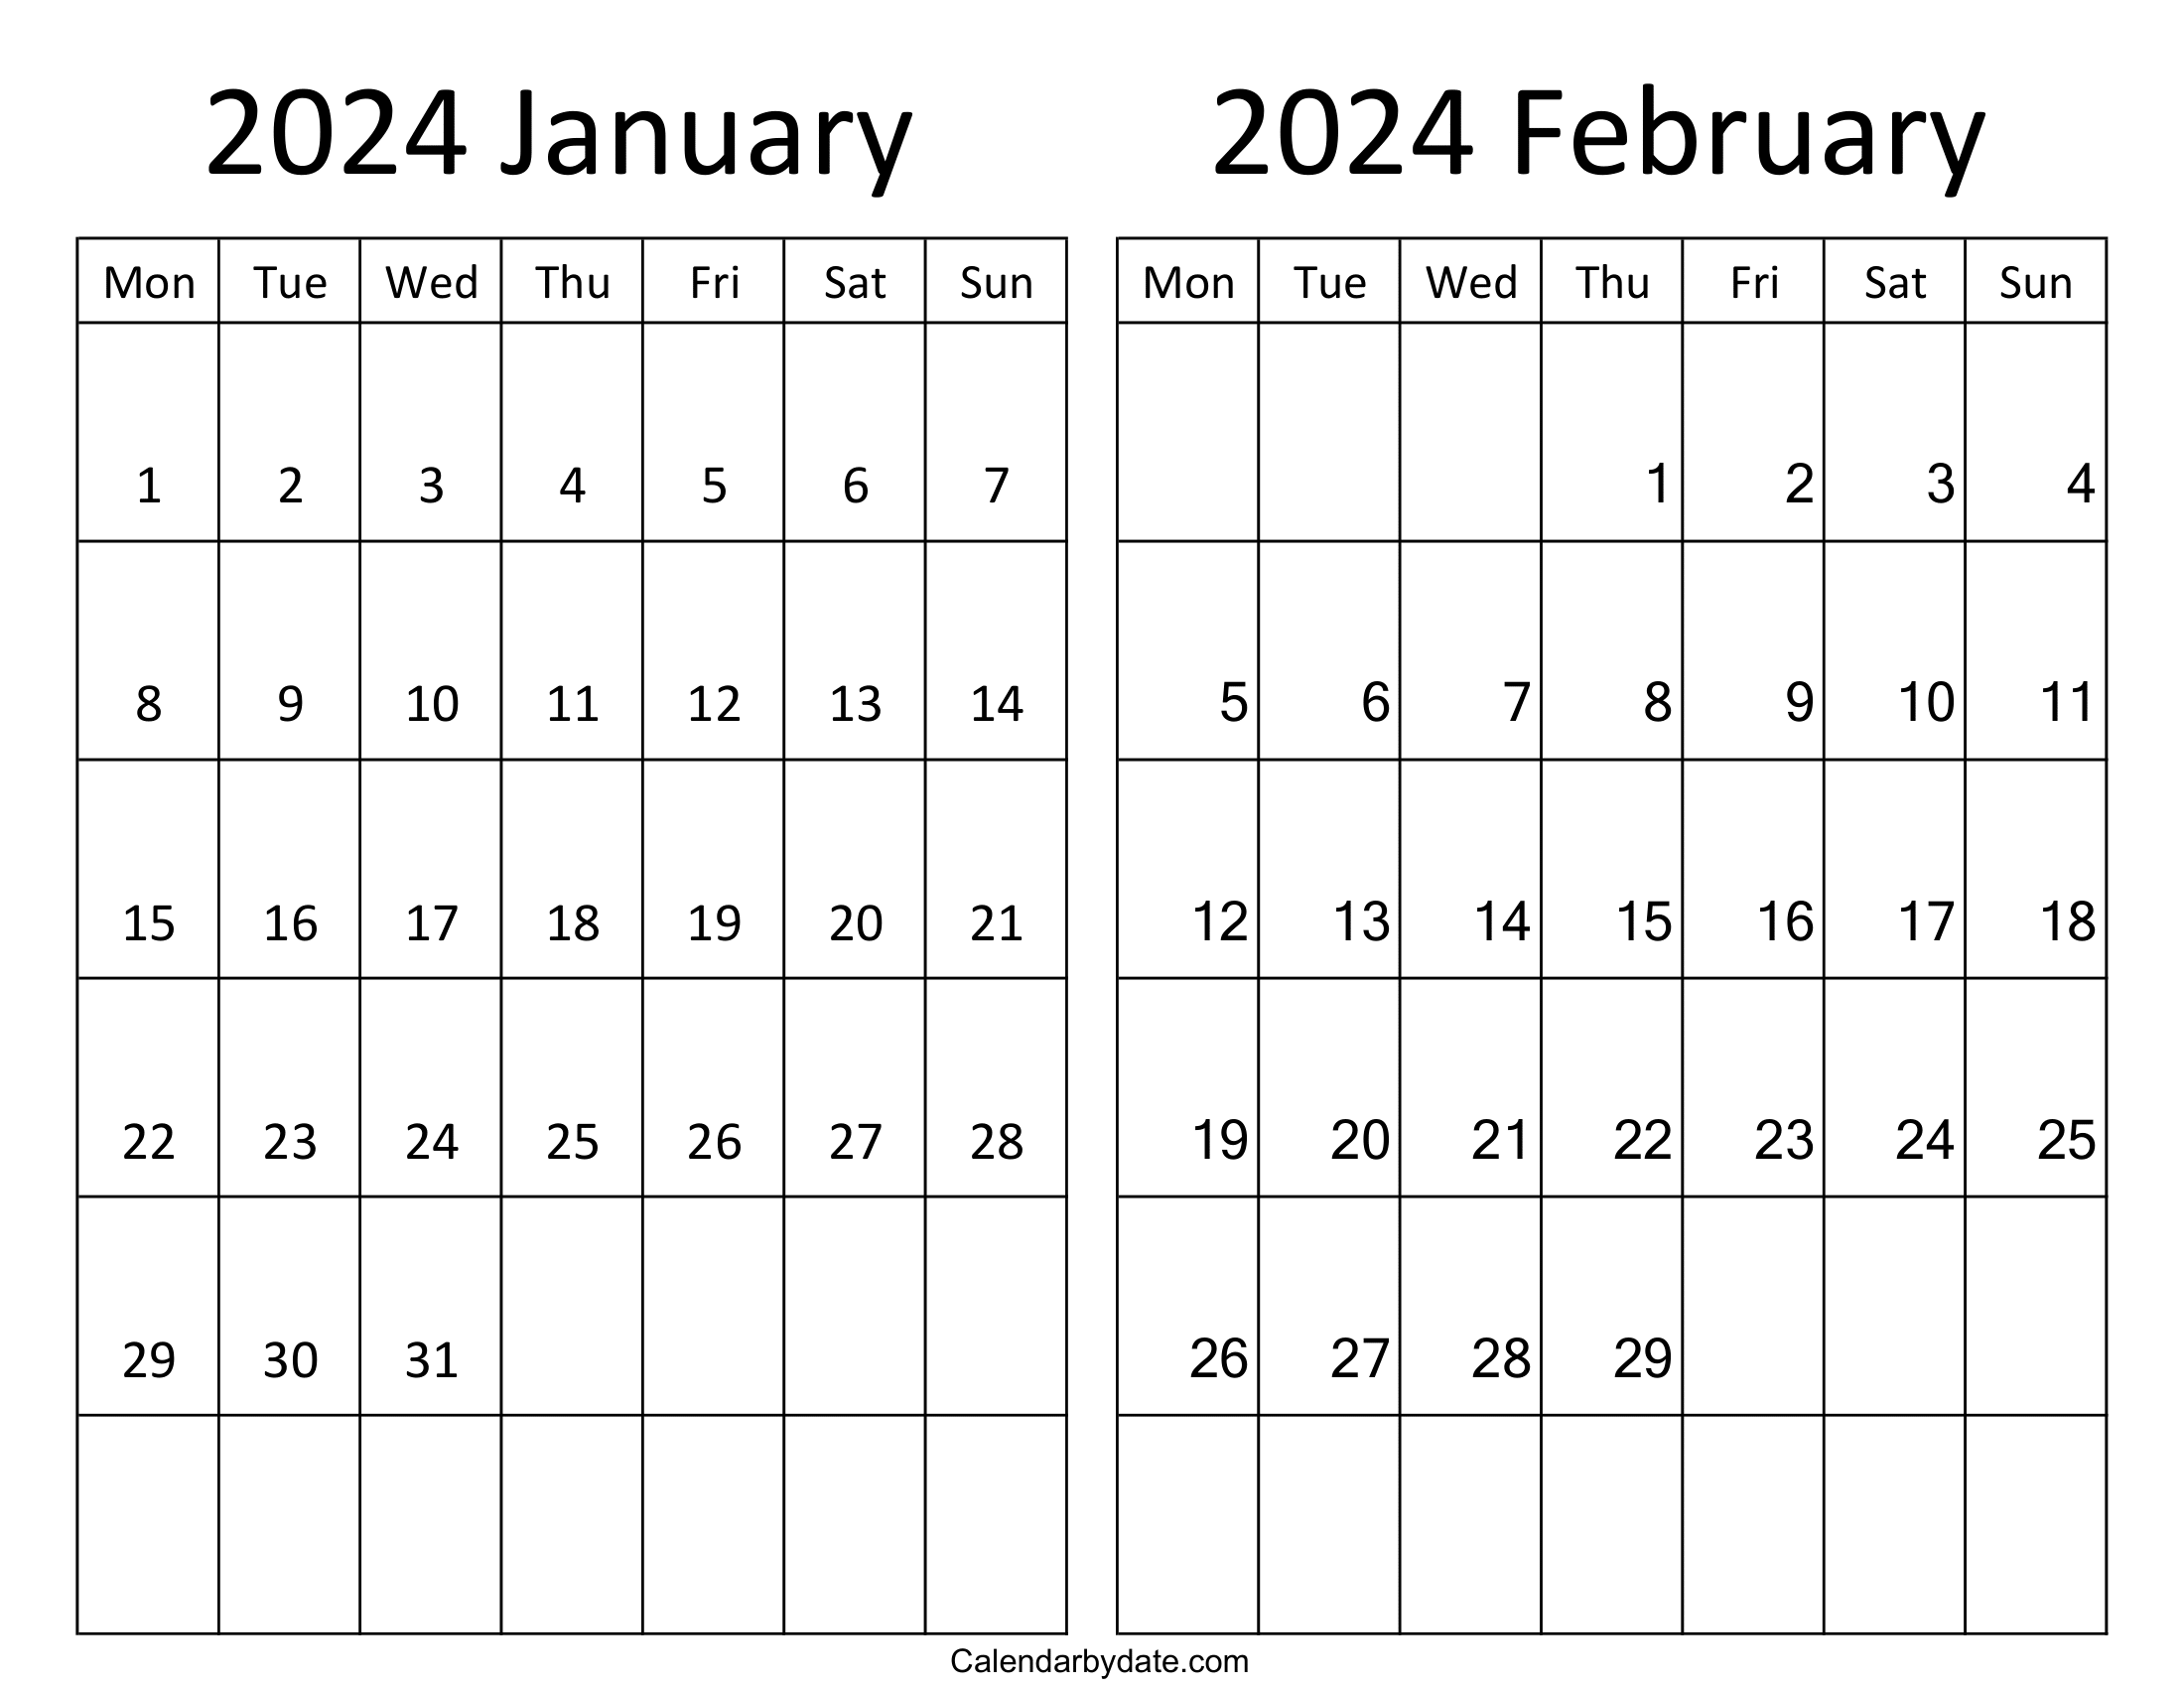 Two-month calendars for January and February 2024, with weekdays starting on Sunday. Both calendar grids are combined onto a single page. The template is US letter size.